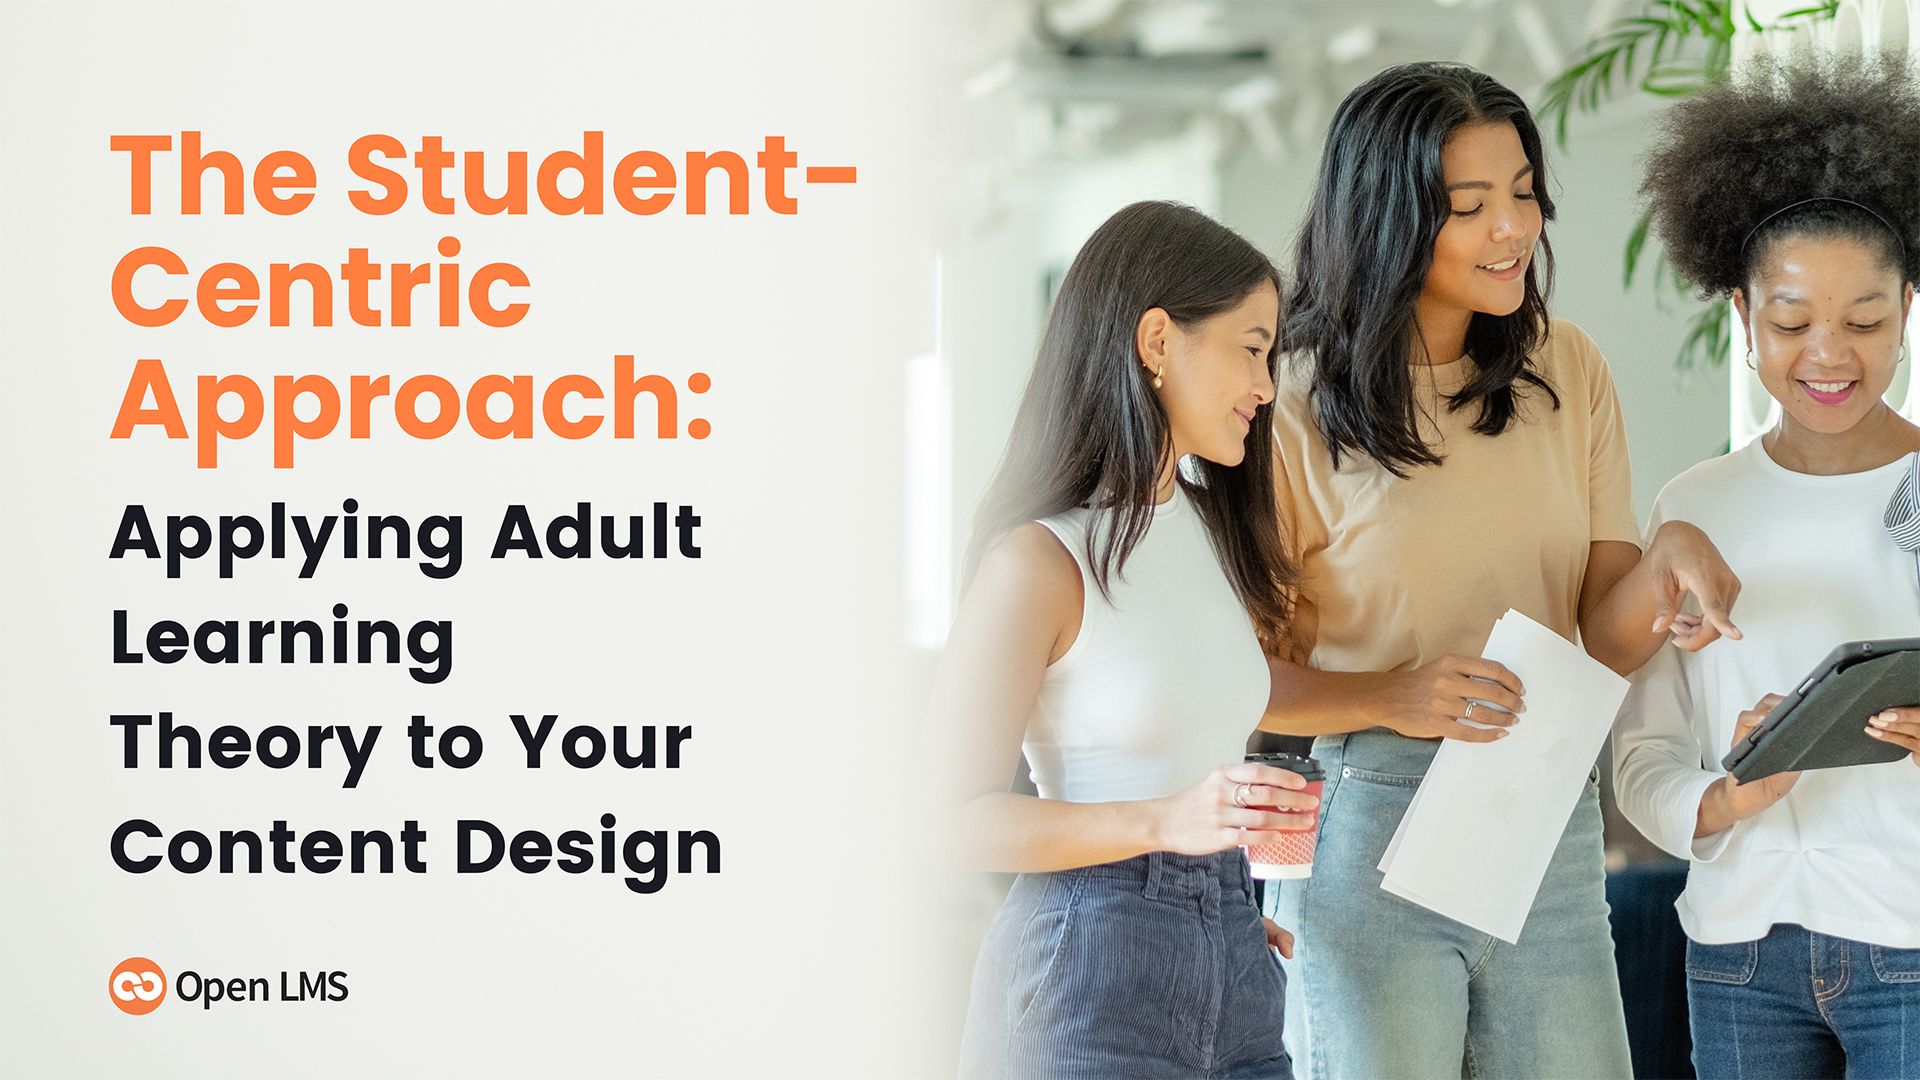 The Student-Centric Approach: Applying Adult Learning Theory to Your Content Design